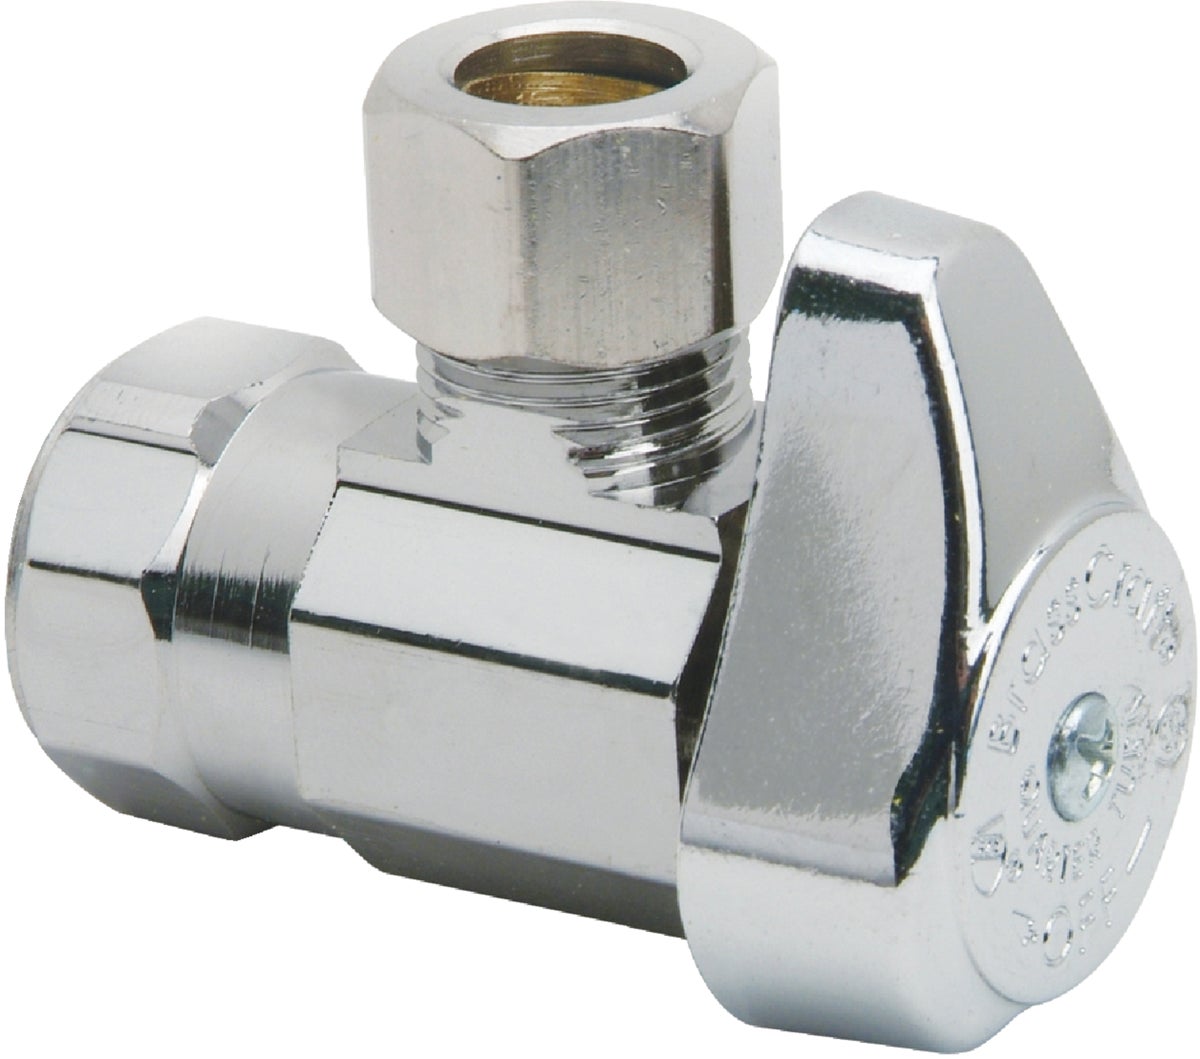 Details about   2 PCS 1/2" FIP X 3/8" OD 1/4 Turn Compression Straight Stop Valve Chrome Plated 